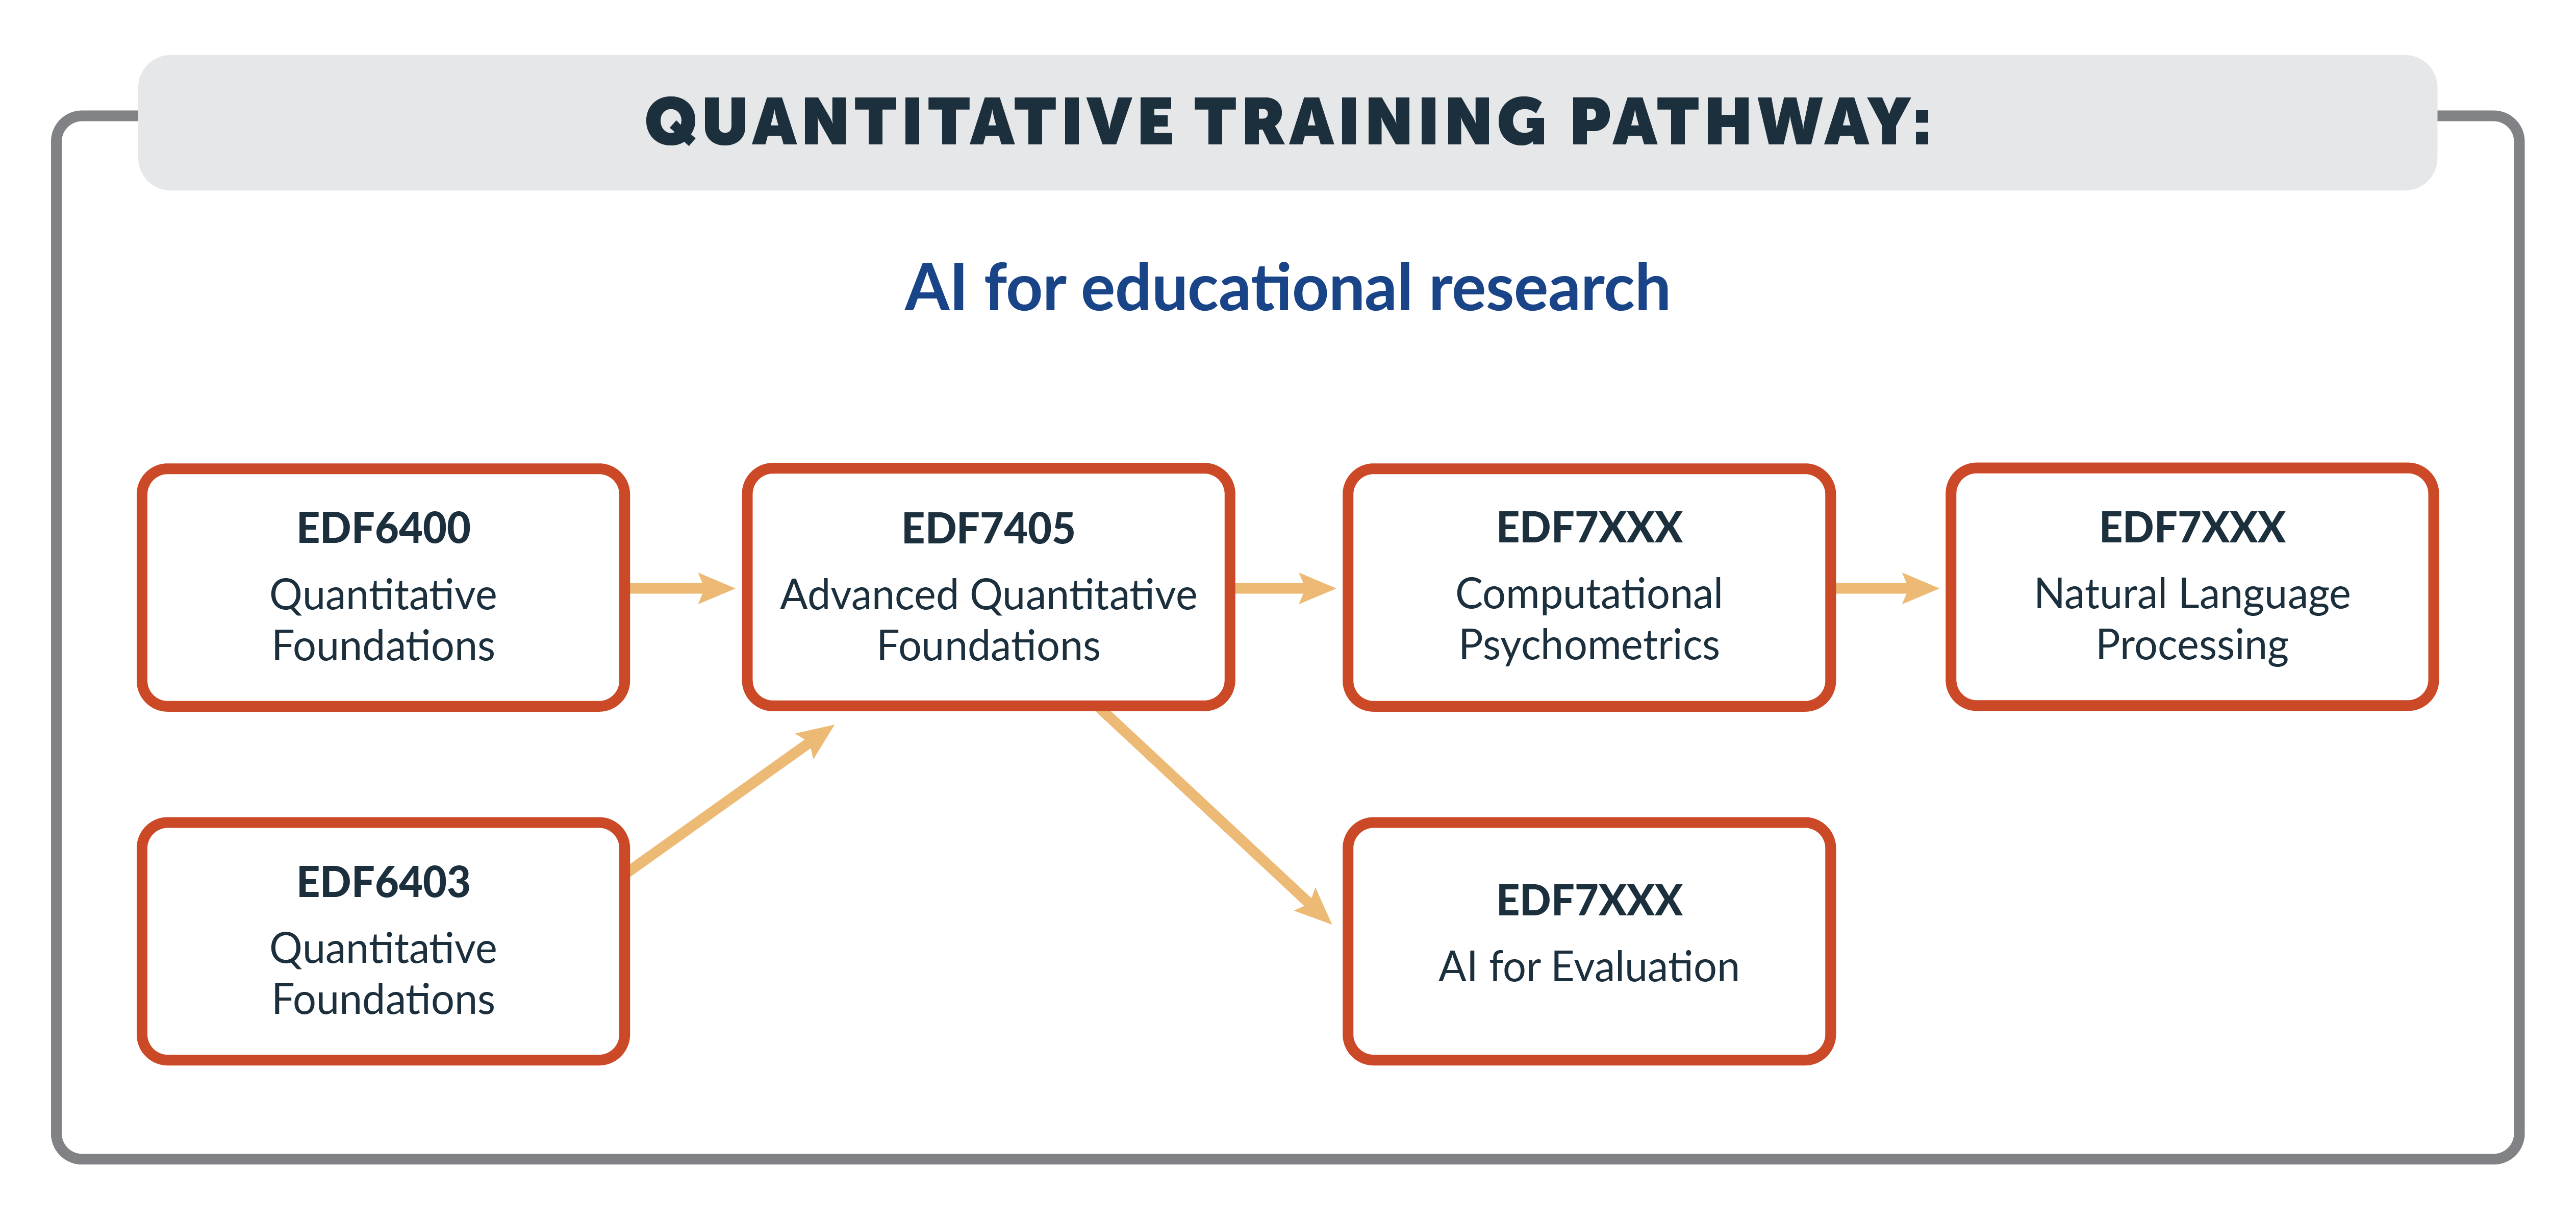 Quantitative Training Pathway - AI for Educational Research